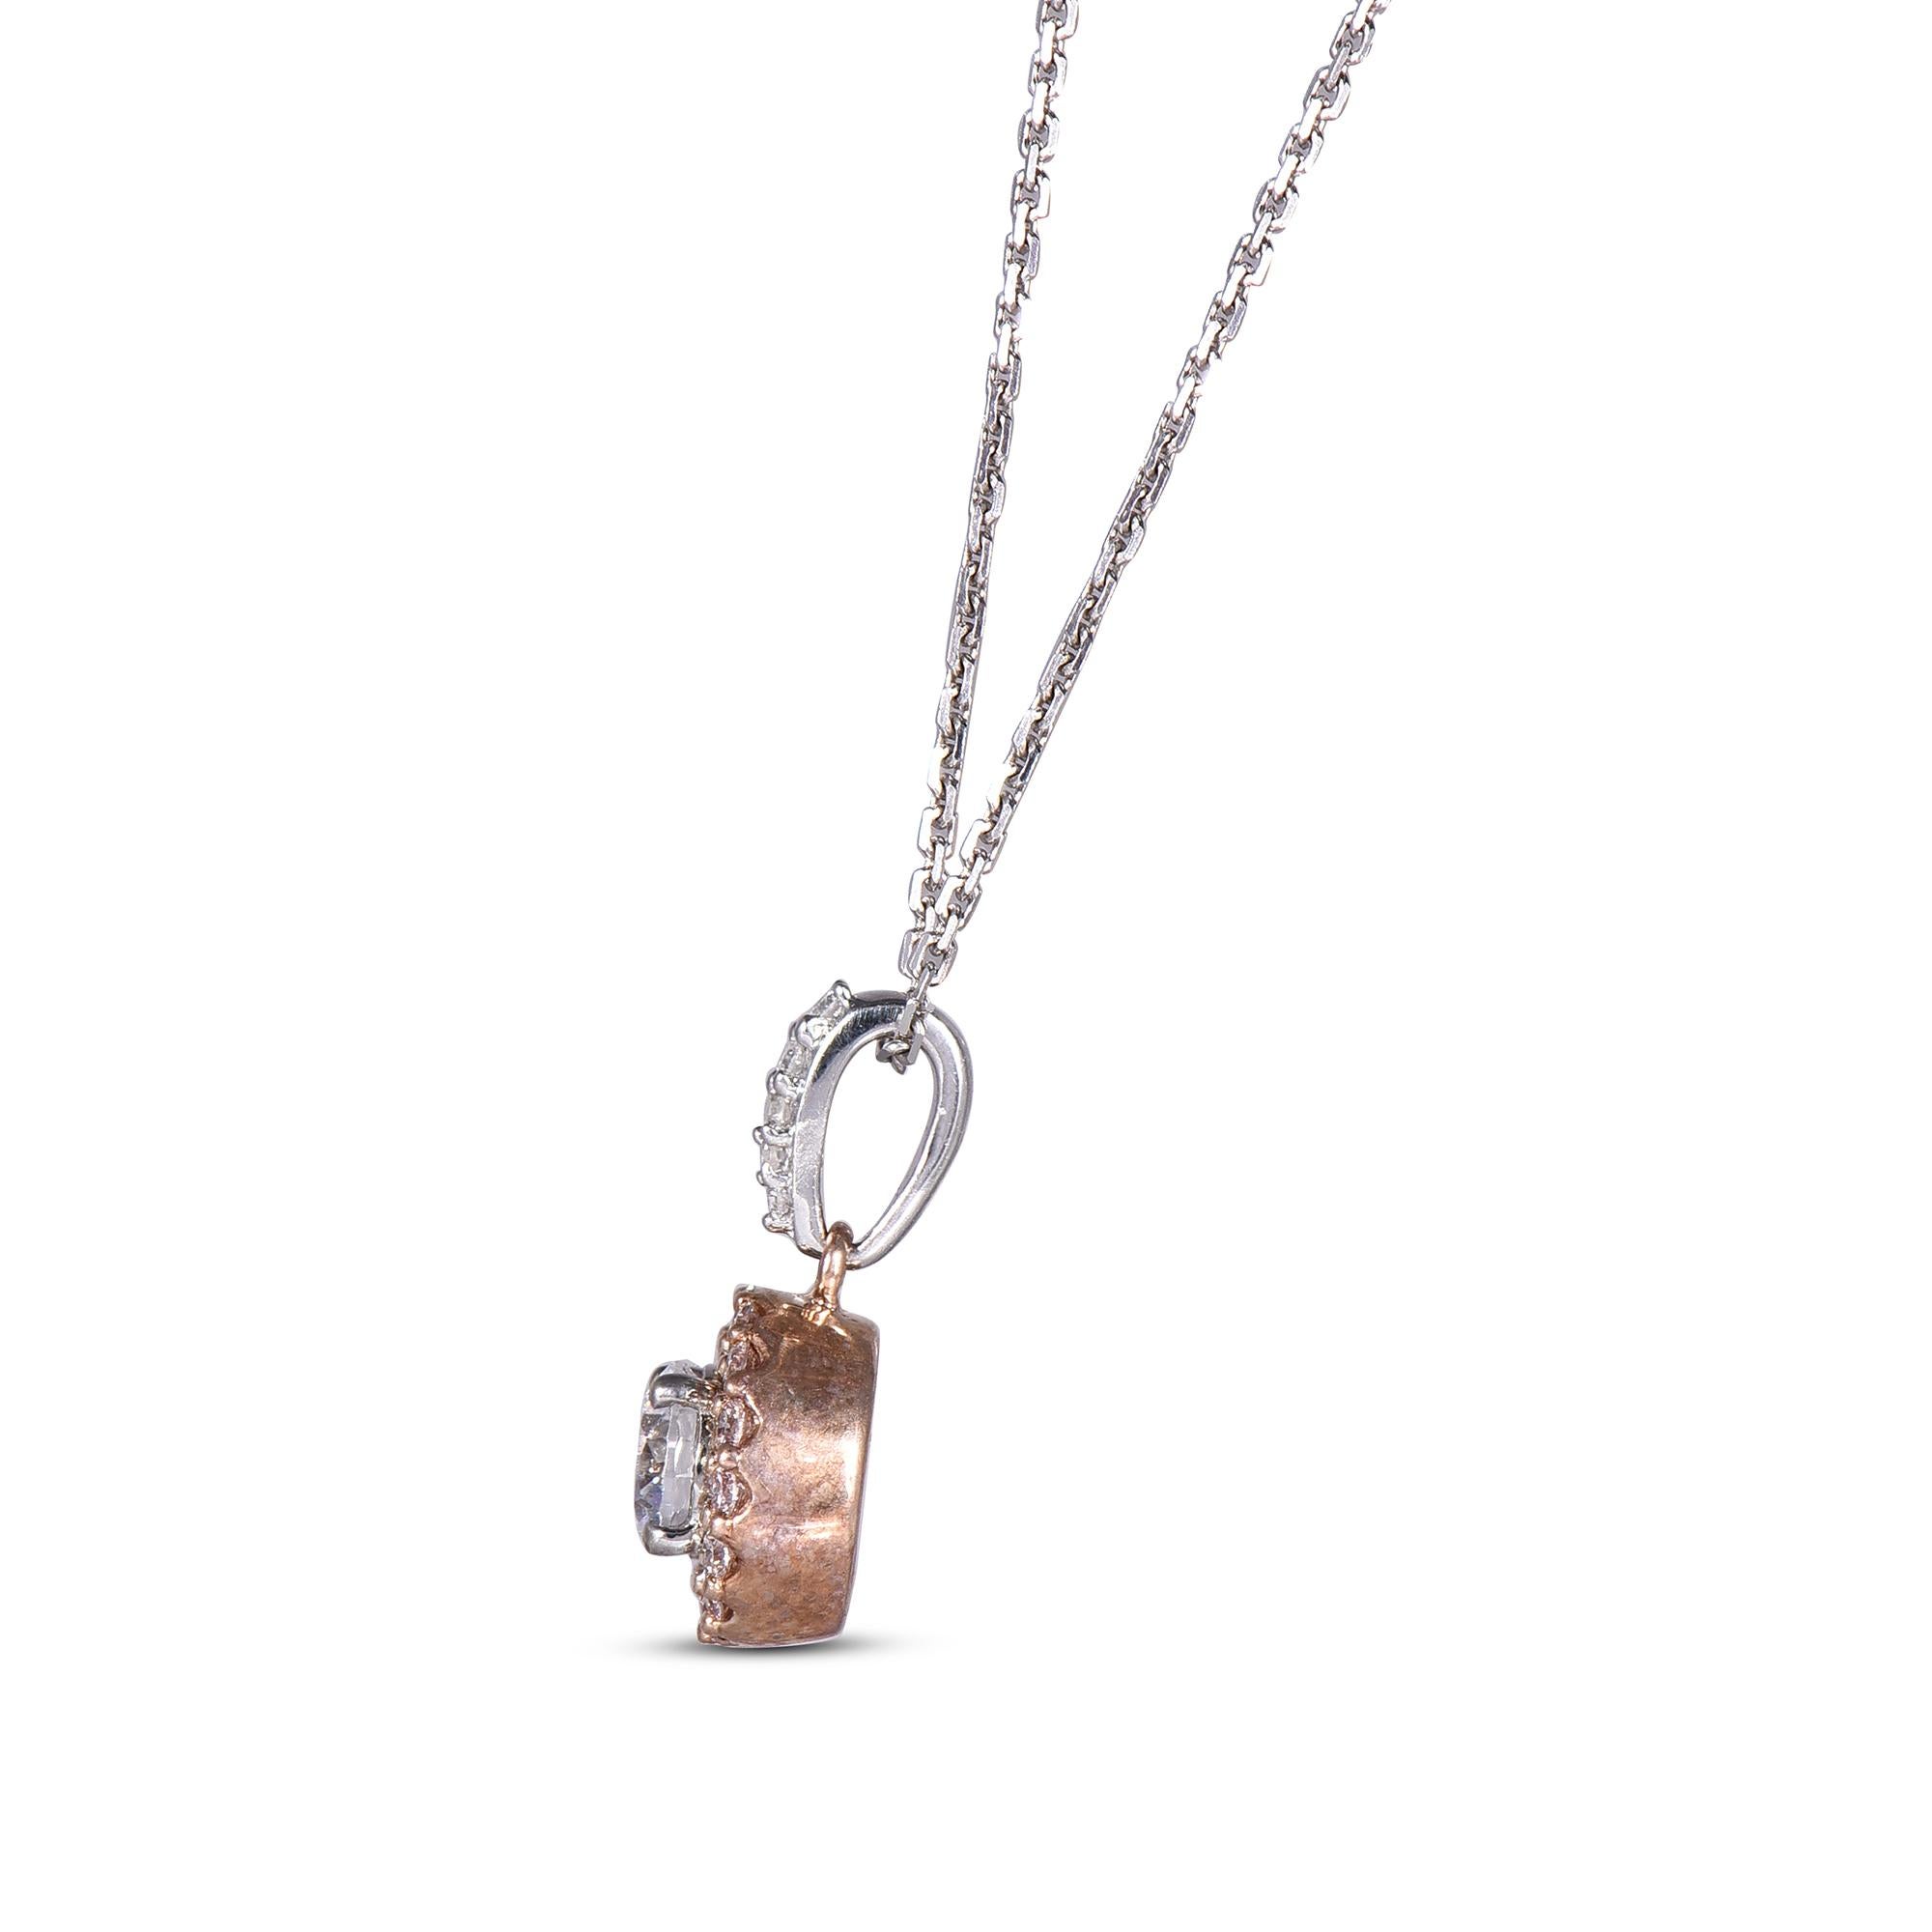 Bring charm to your look with this diamond pendant. The ring is crafted from 18-karat Two Toneand features Round Brilliant 6 white and 15 pink diamonds Prong set, G-H color SI1-2 clarity and a high polish finish complete the Brilliant 